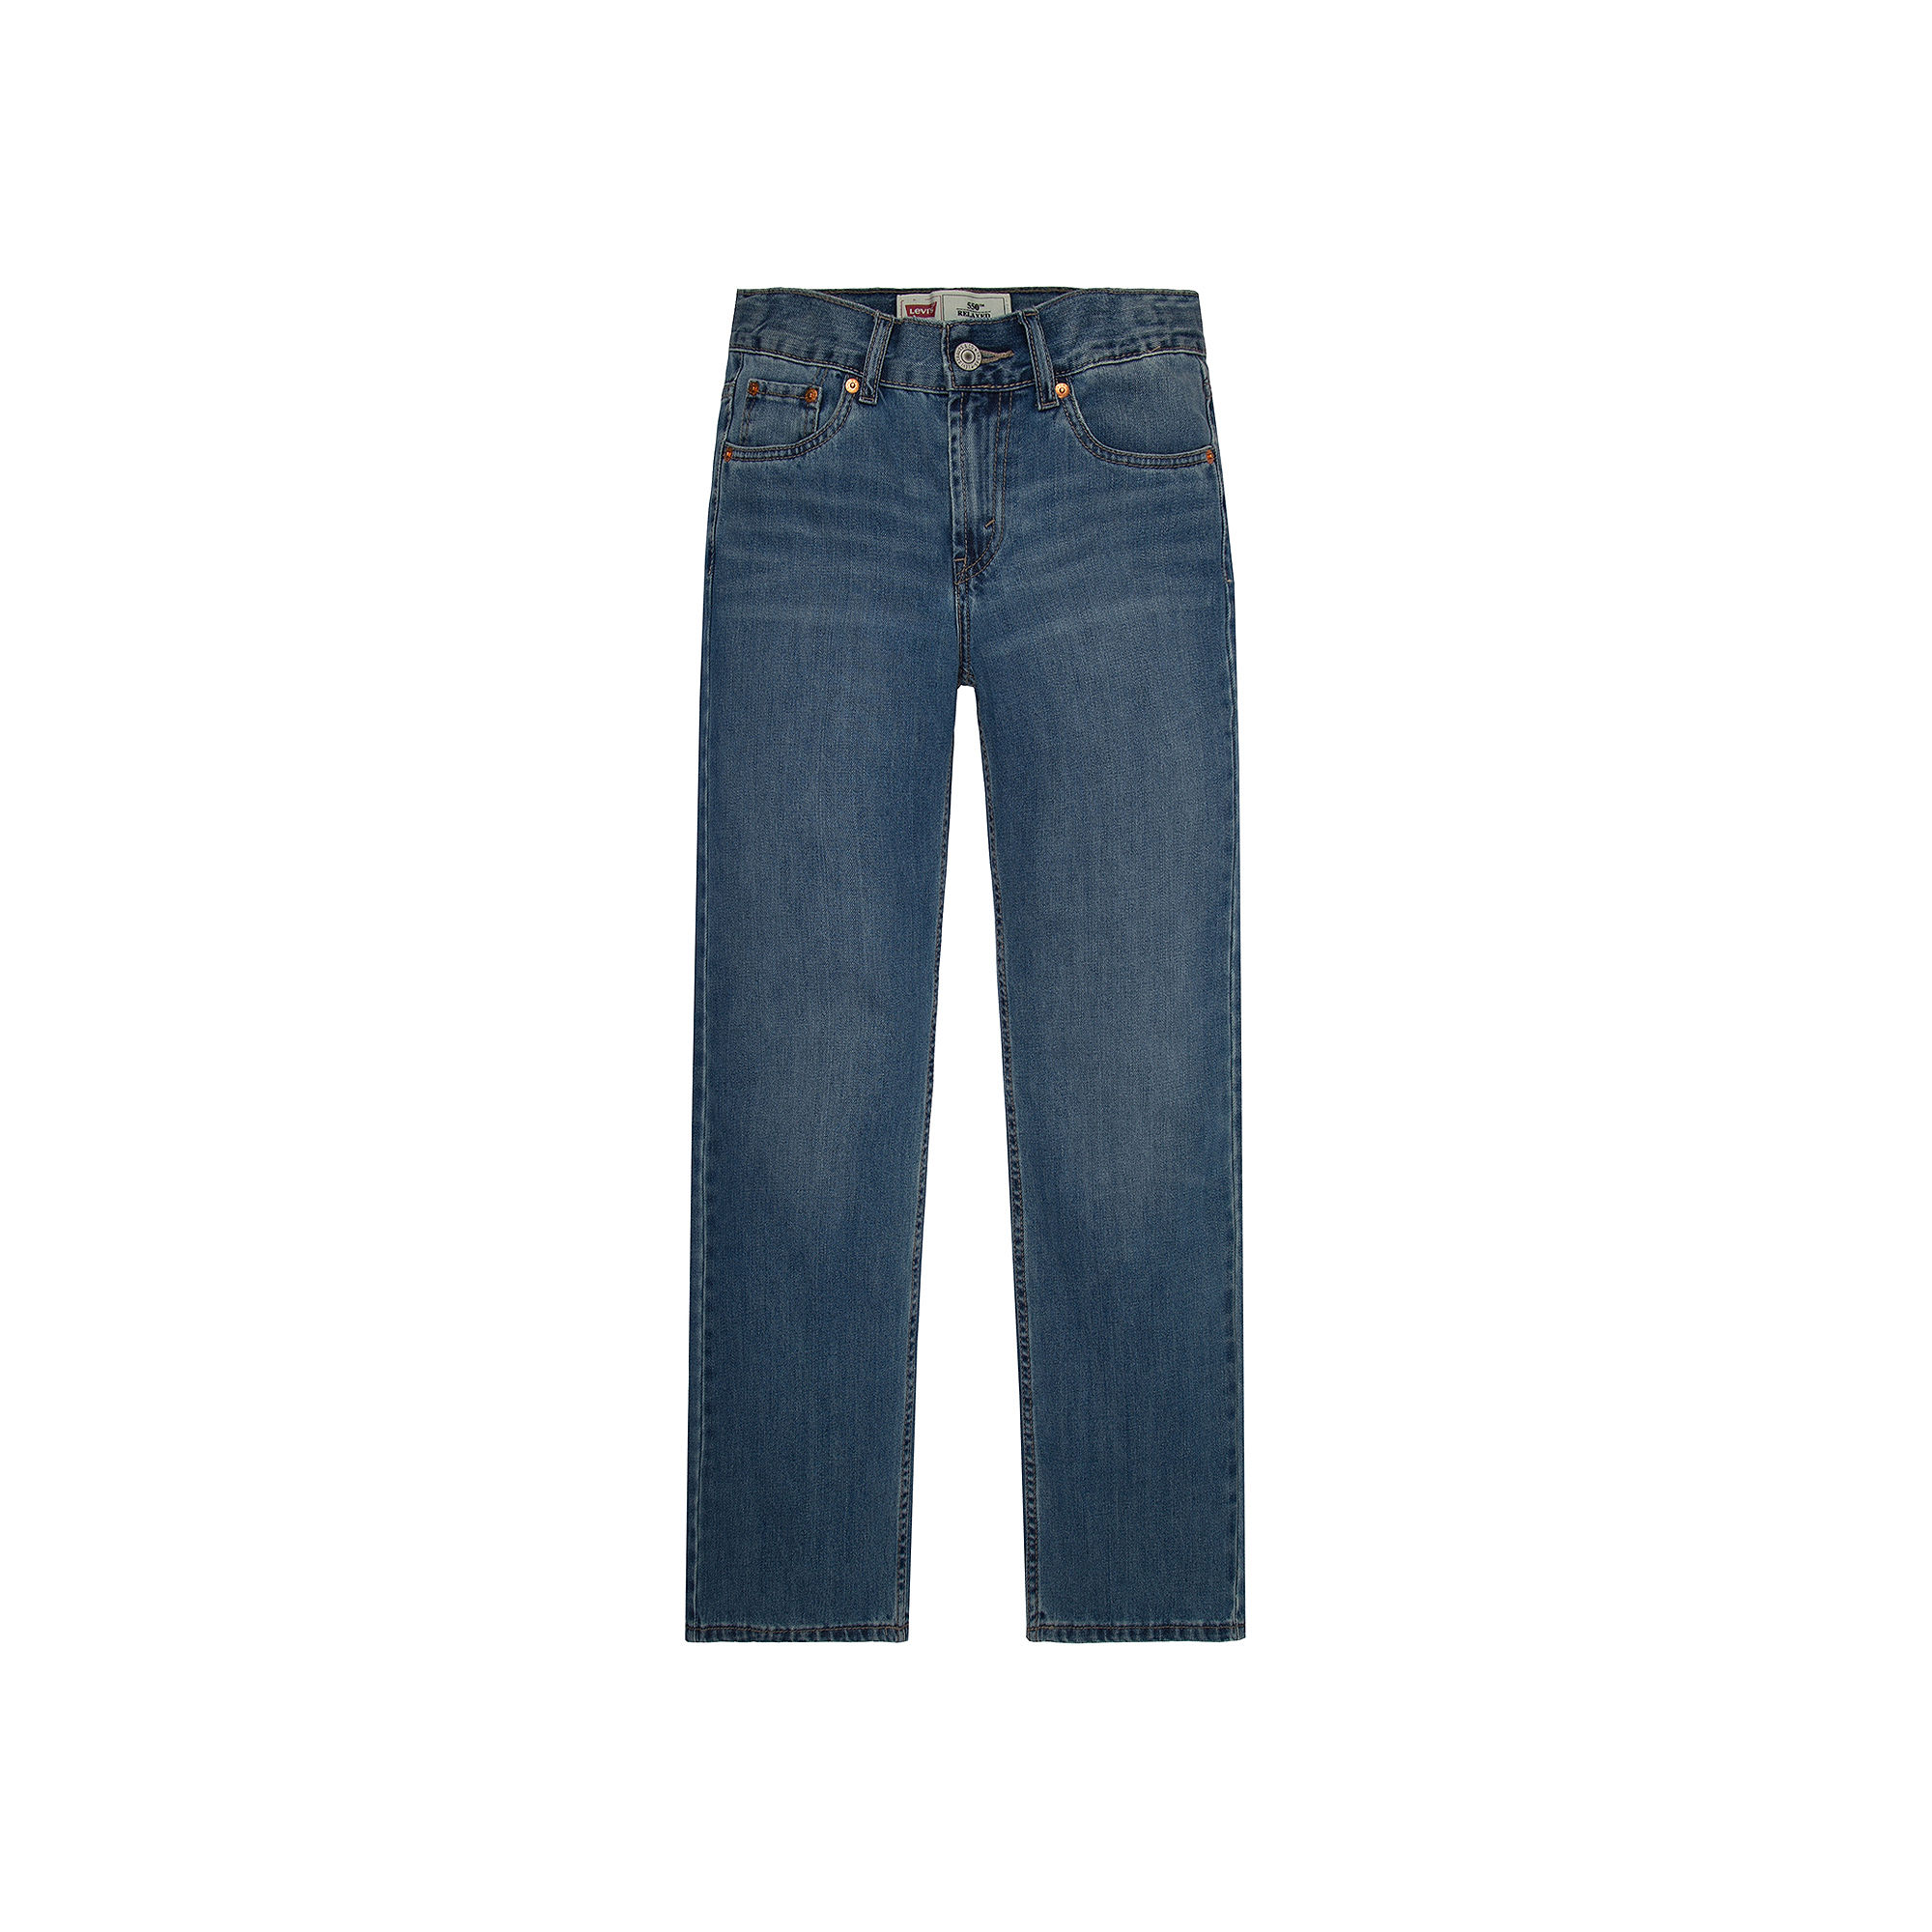 UPC 617847620089 - Levi's 550 Boy's Relaxed Fit Jeans - LEVI STRAUSS ...